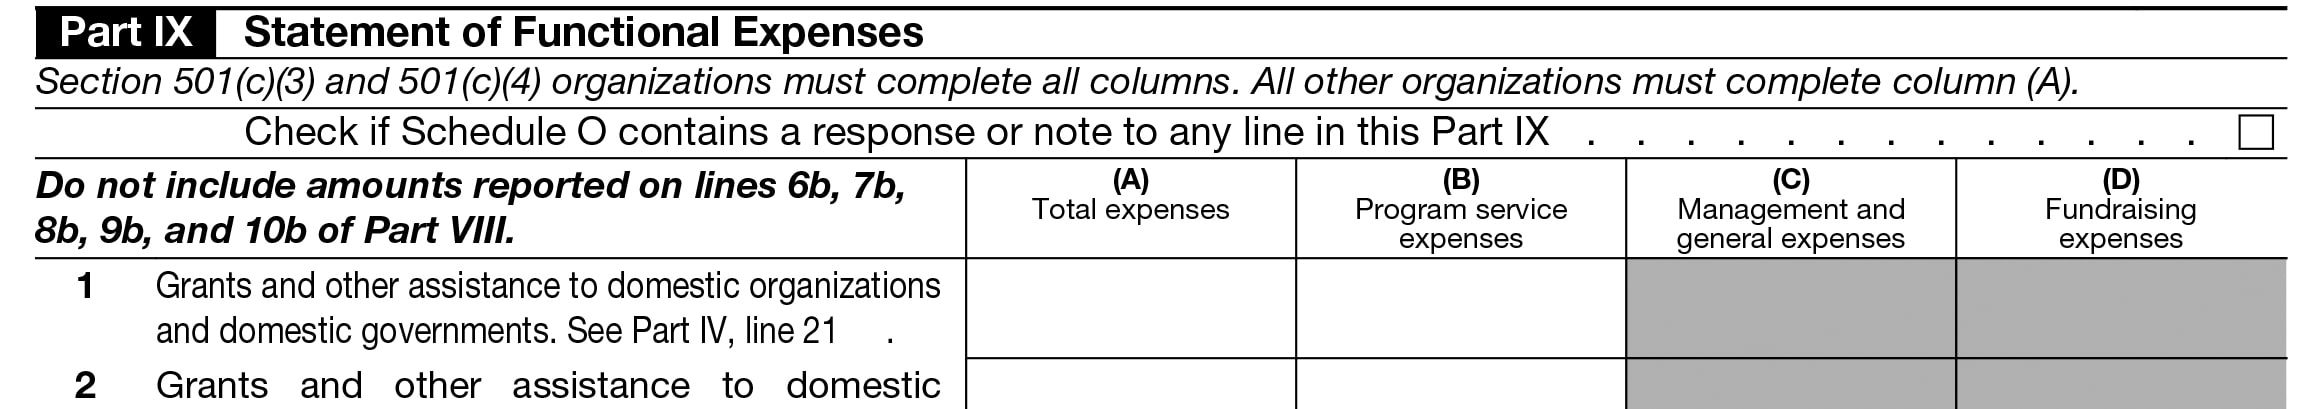 Instructions to complete Form 990 Part IX - Statement of Functional Expenses